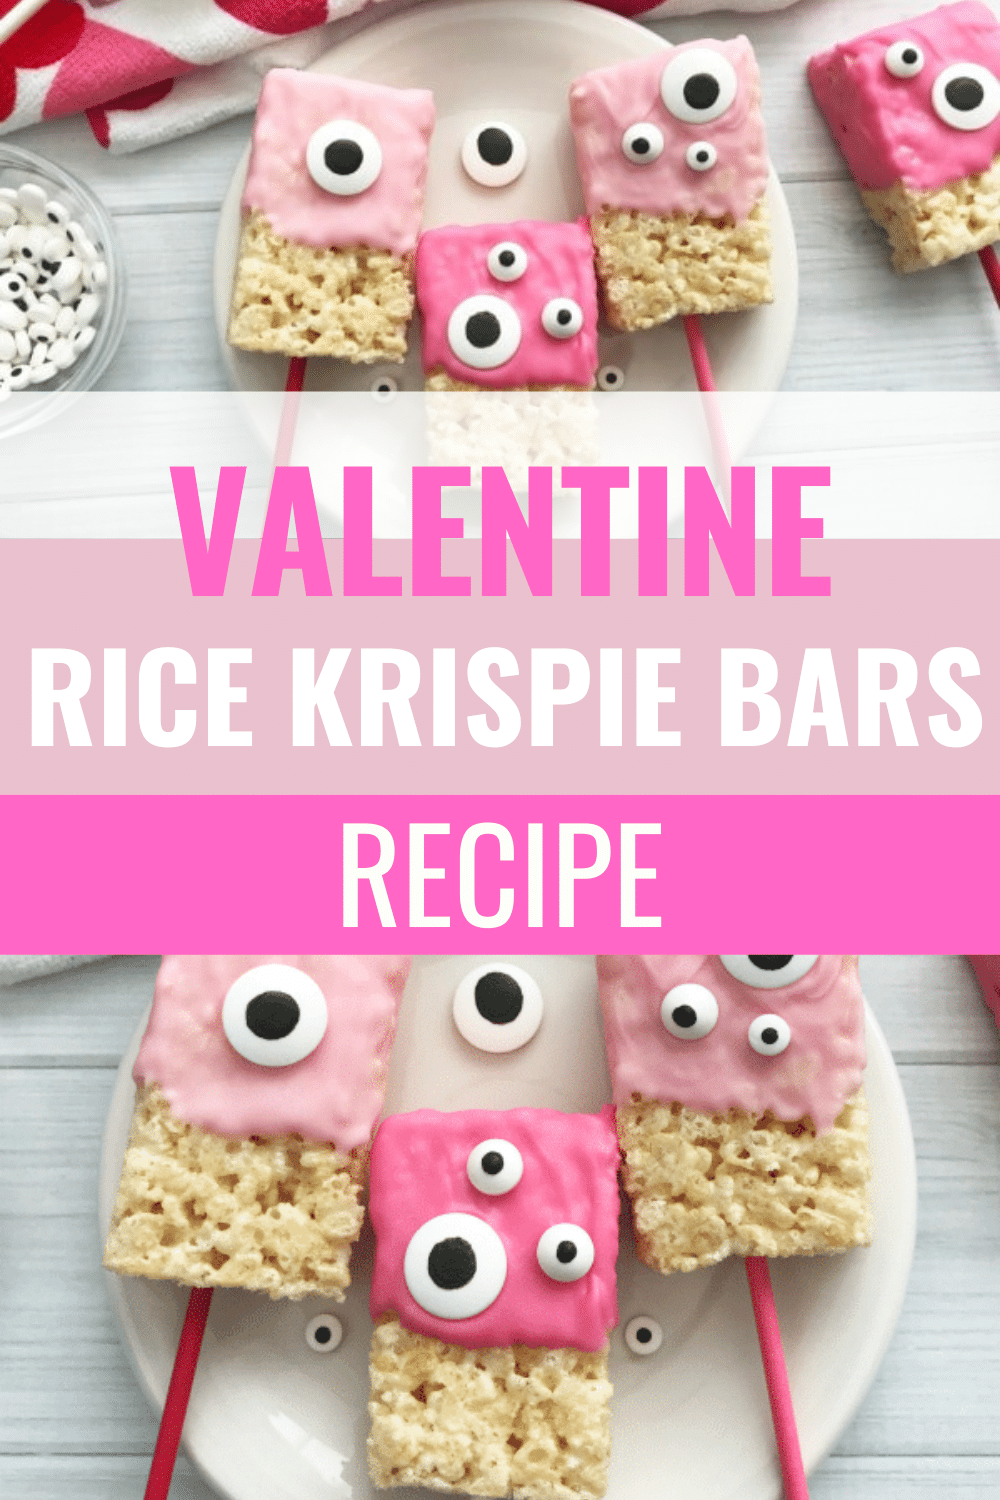 Valentine Rice Krispie Bars are easy to make with candy melts and candy eyes. These monster themed Valentine's Day treats will be a hit. #valentinesday #ricekrispie #monsters via @wondermomwannab